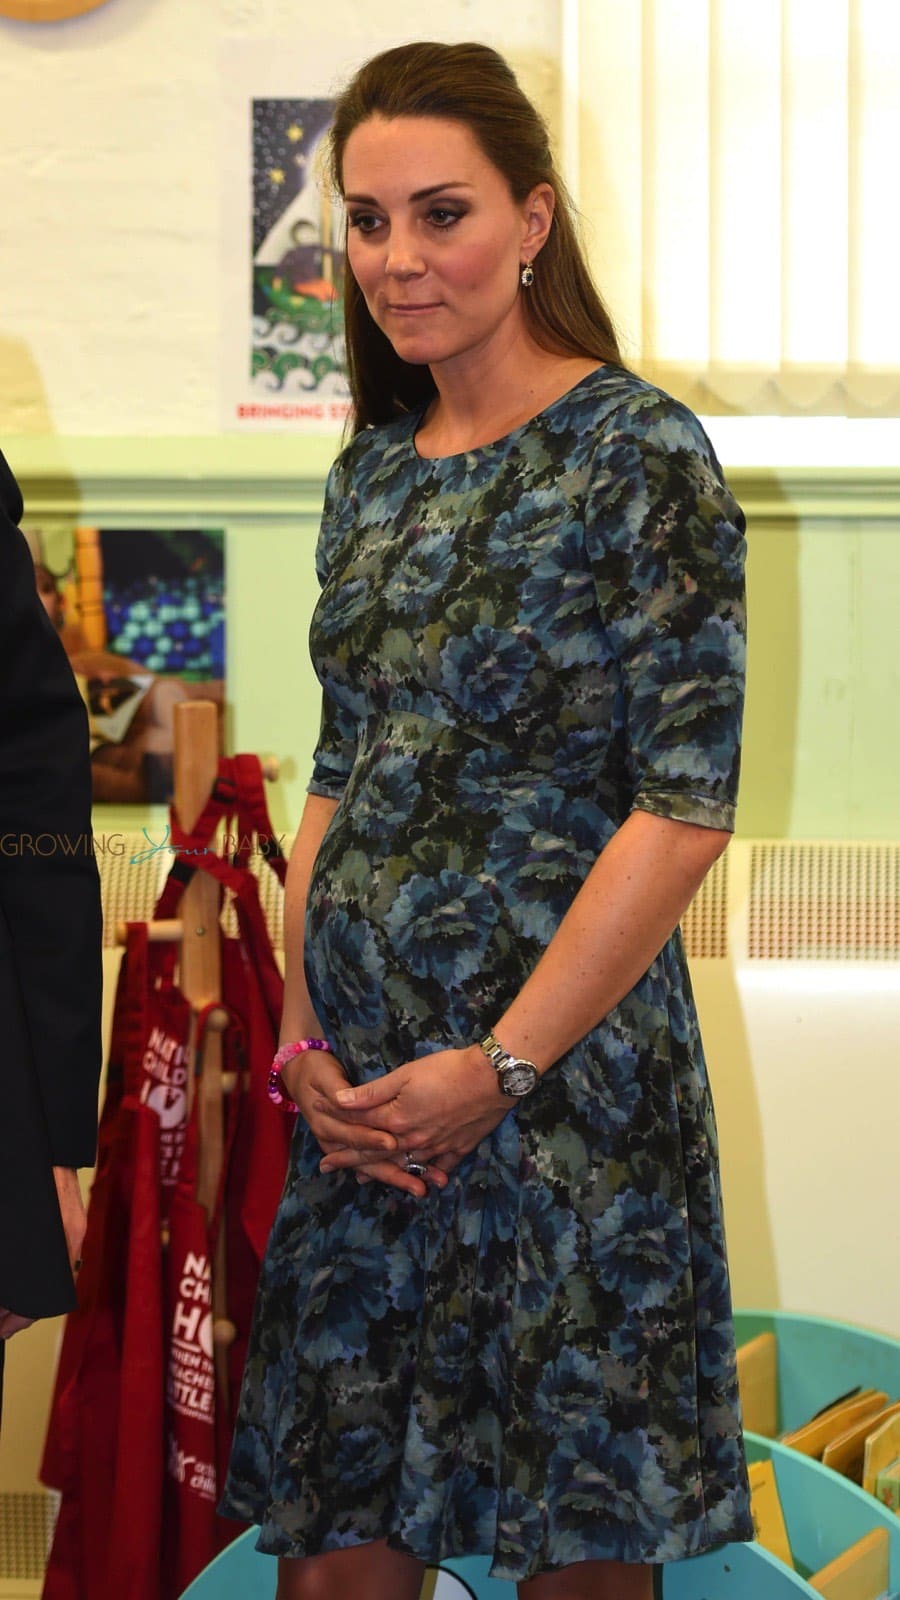 Pregnant-Kate-Middleton-is-all-smiles-spending-time-with-the-children-while-visiting-Cape-Hill-Childrens-Centre-in-Smethwick-London.jpg